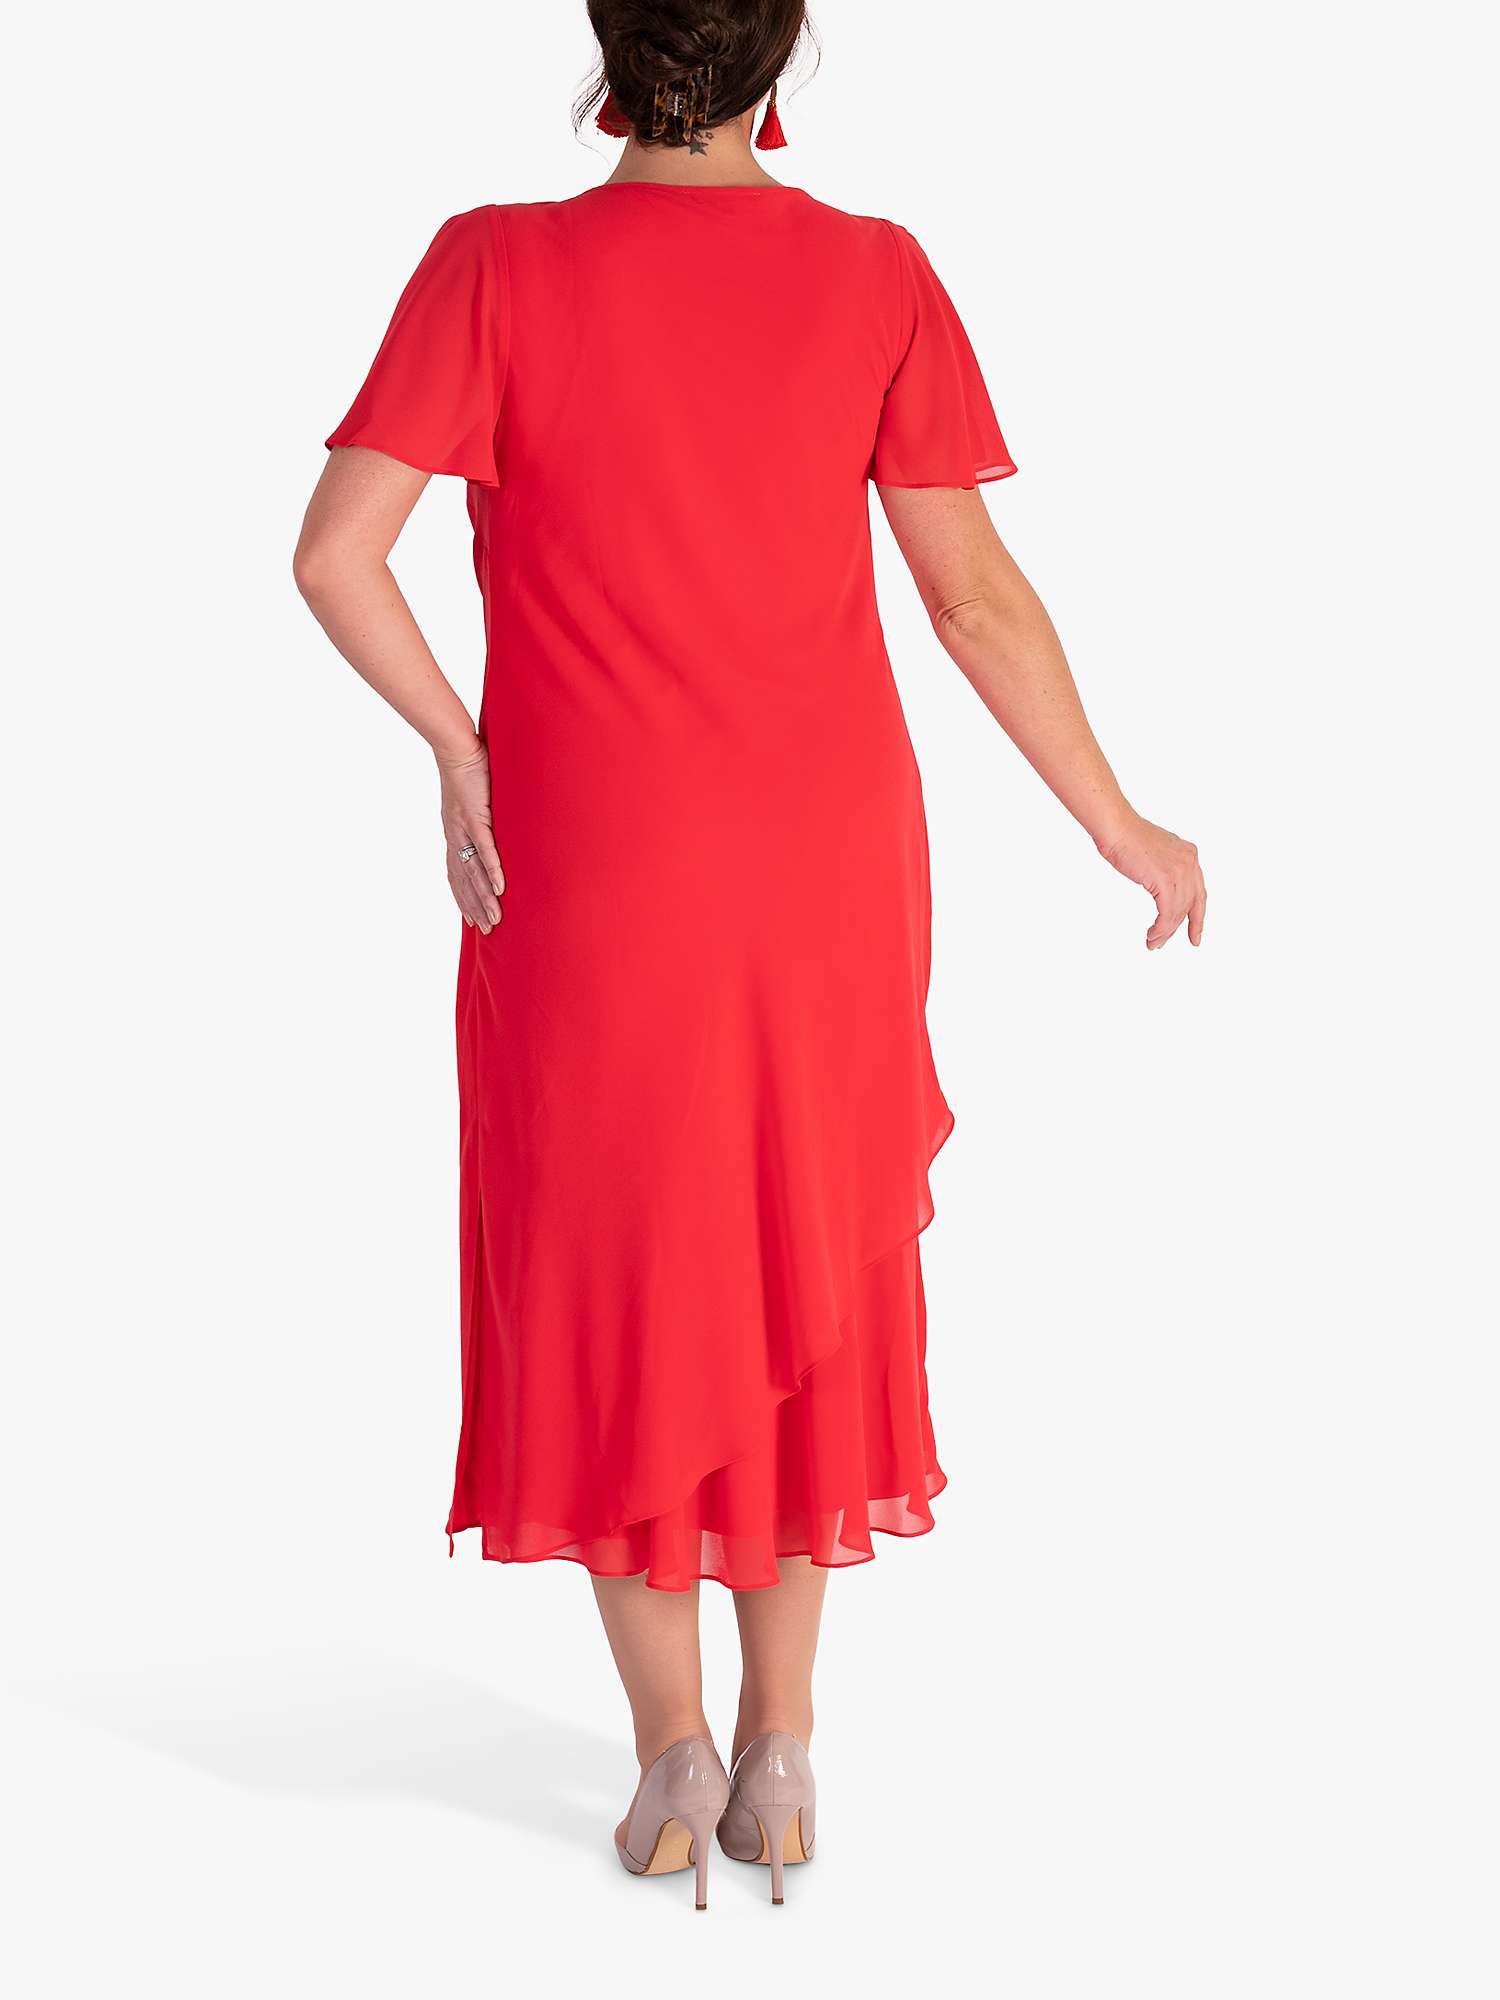 Buy chesca Double Layer Chiffon Cowl Neckline Dress Online at johnlewis.com